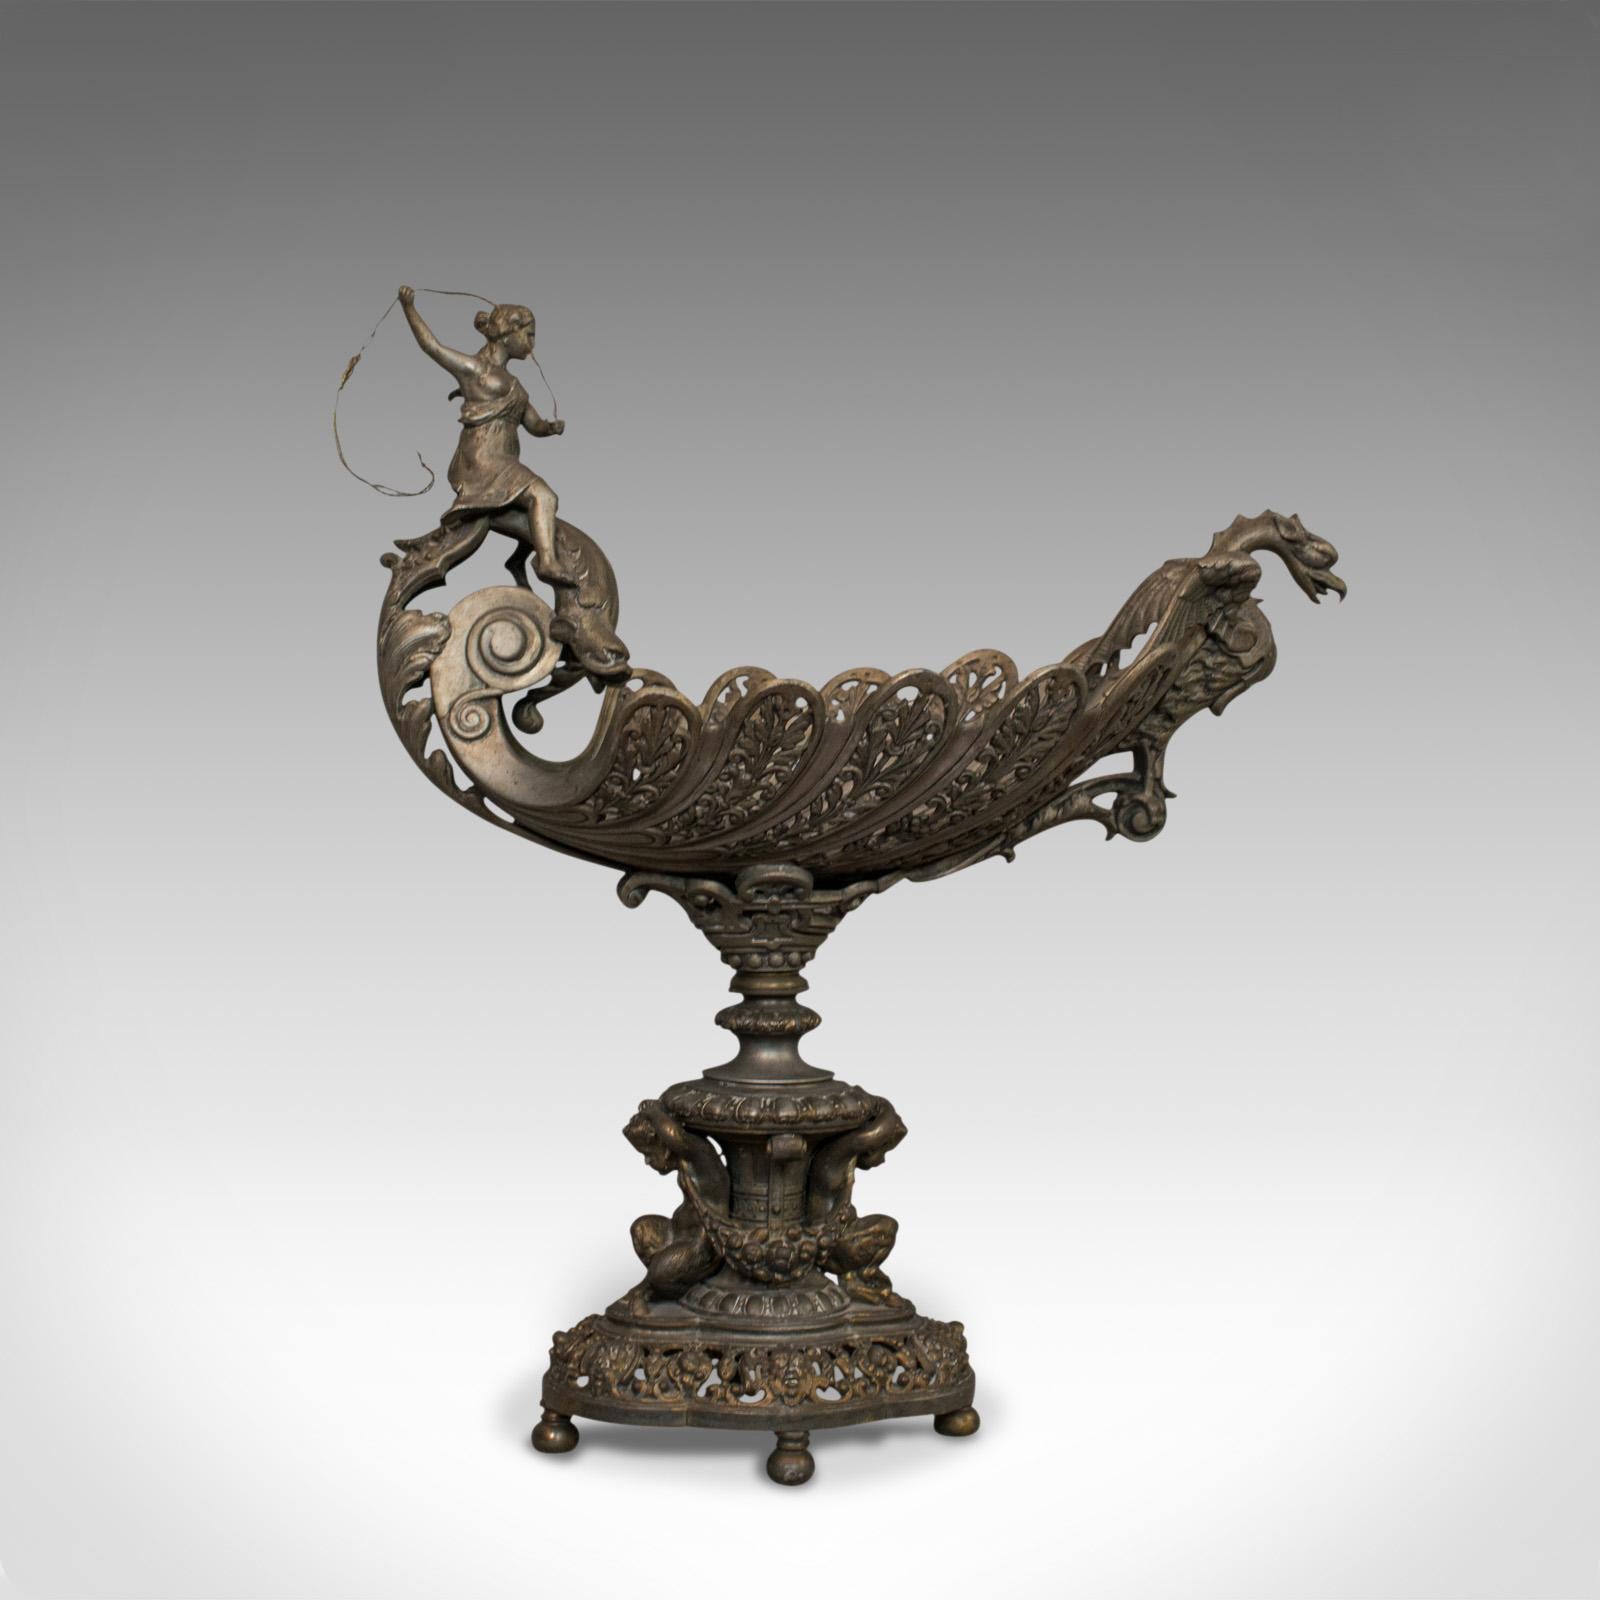 This is an antique centrepiece in classical taste. A French, bronze spelter fruit or serving bowl and dating to the Victorian period of the late 19th century, circa 1890.

Of highly impressive classical form - a conversation starter